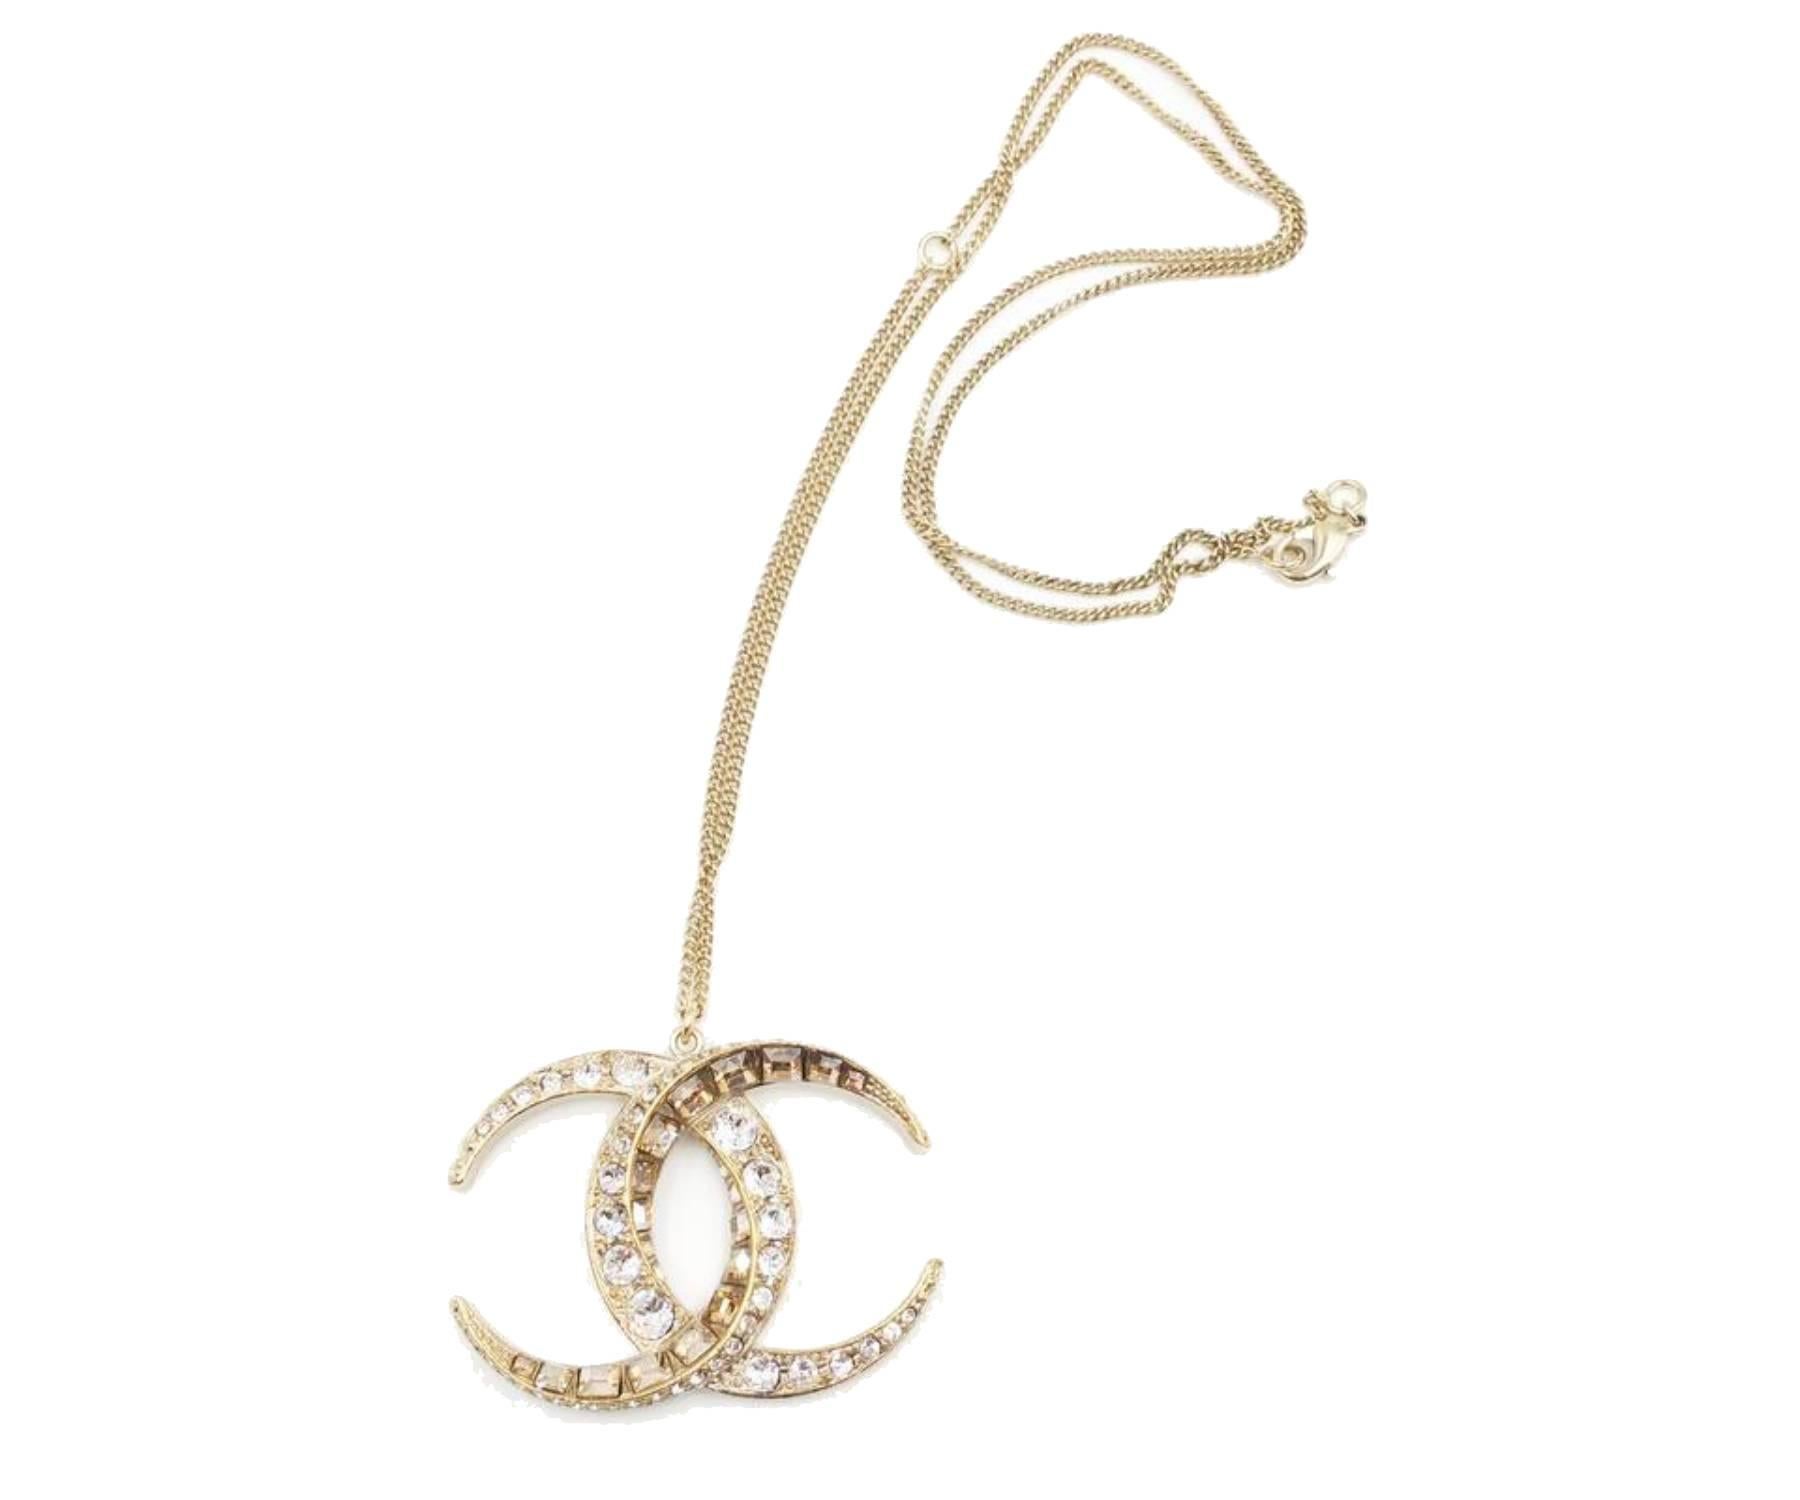 Chanel Gold CC Moonlight Paris Dubai Large Pendant Necklace

* Marked 15
* Made in Italy
* Comes with the original box and pouch

-The pendant is approximately 2″ x 1.5″.
-The chain is from 17″ to extended 24″.
-Very shiny and clean
-One of the most